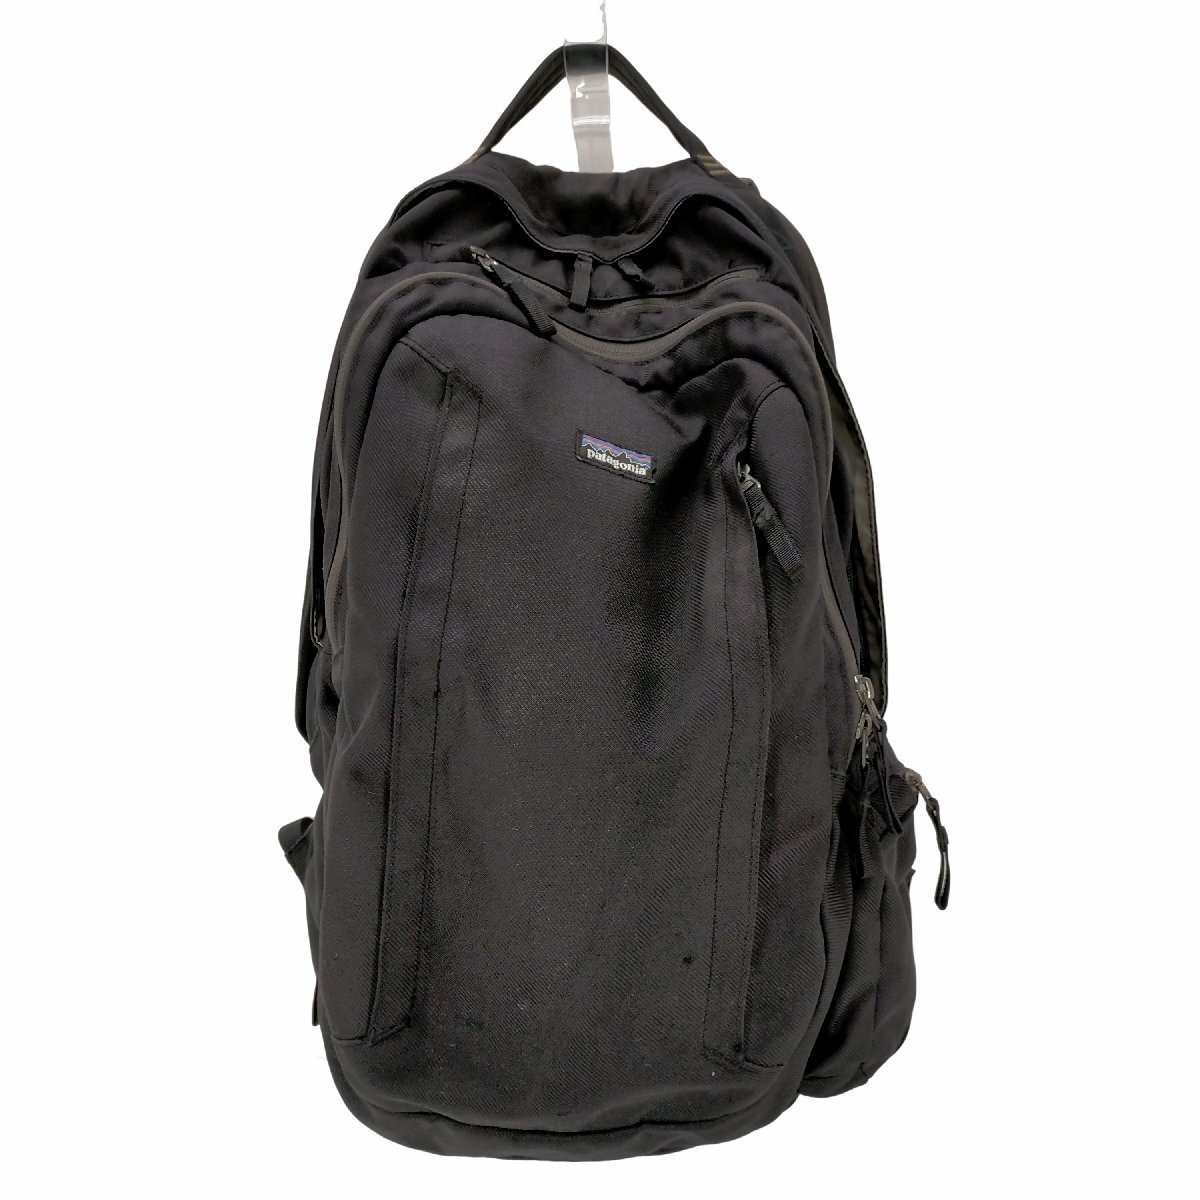 patagonia(パタゴニア) TRANSPORT PACK 30L メンズ ONE SIZE 中古 古着 1006